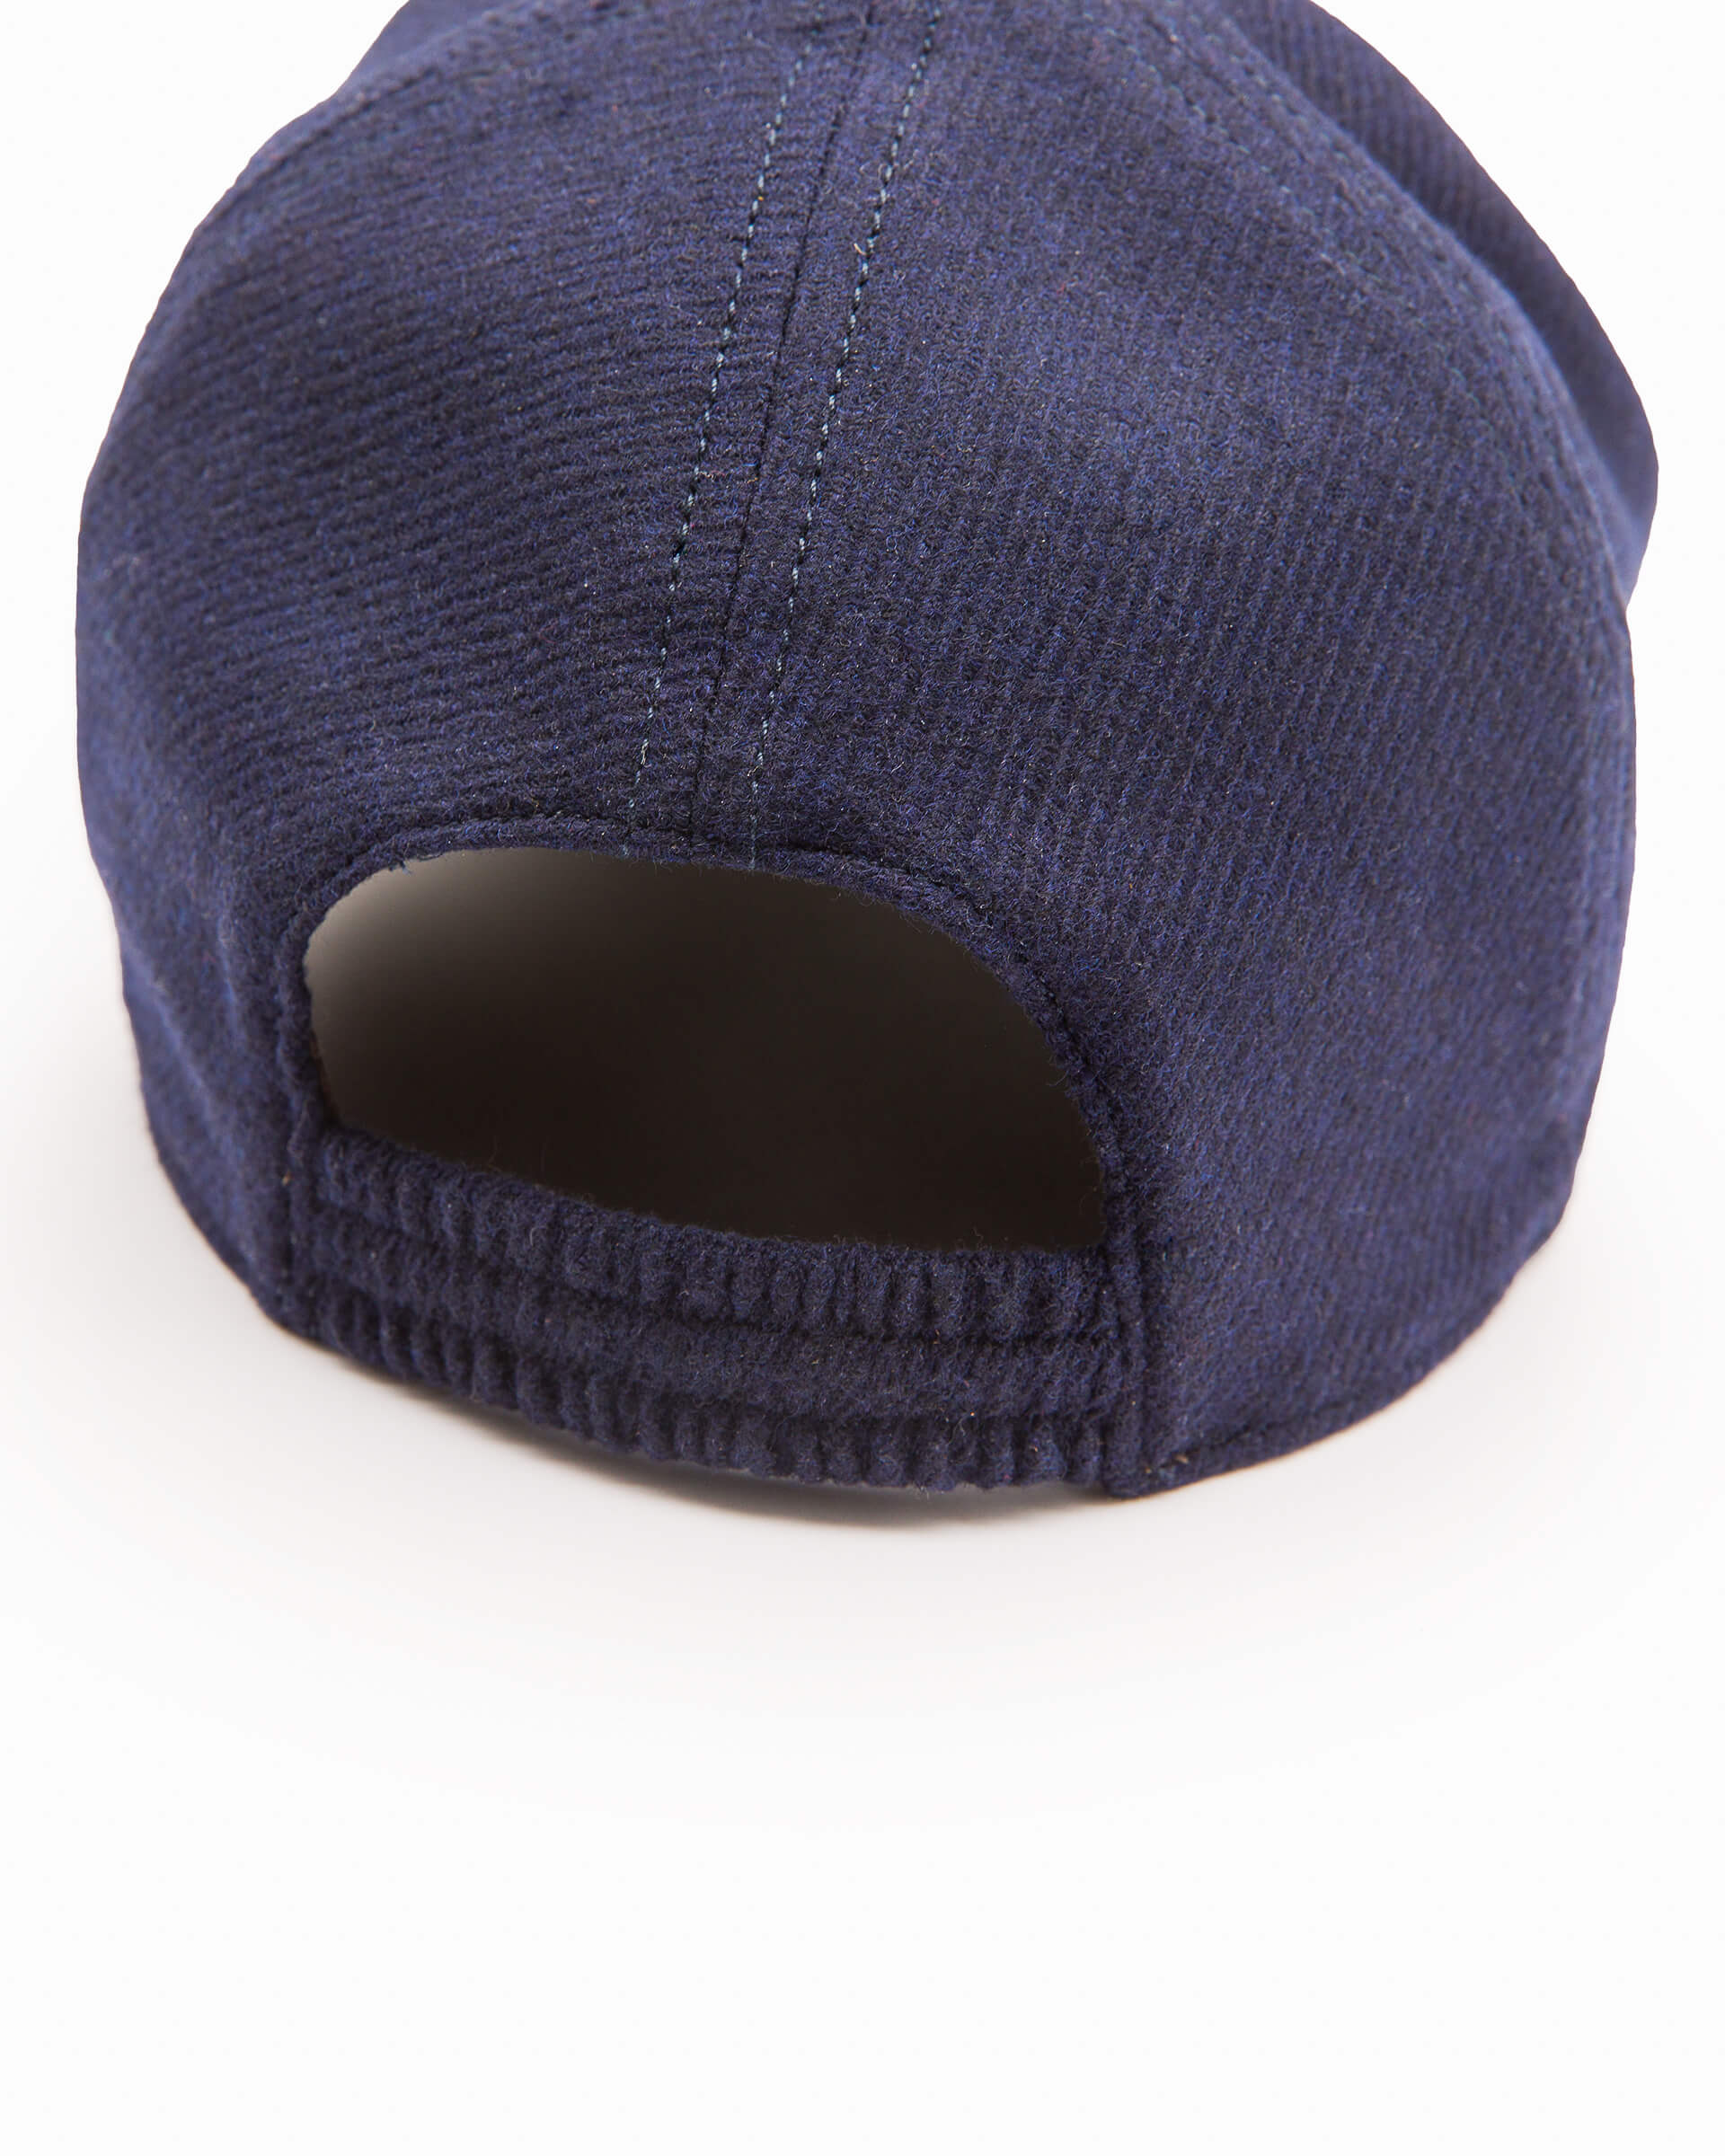 of Firenze cap cashmere Andrea blue visor hat water-repellent made Ventura with Baseball eclipse -